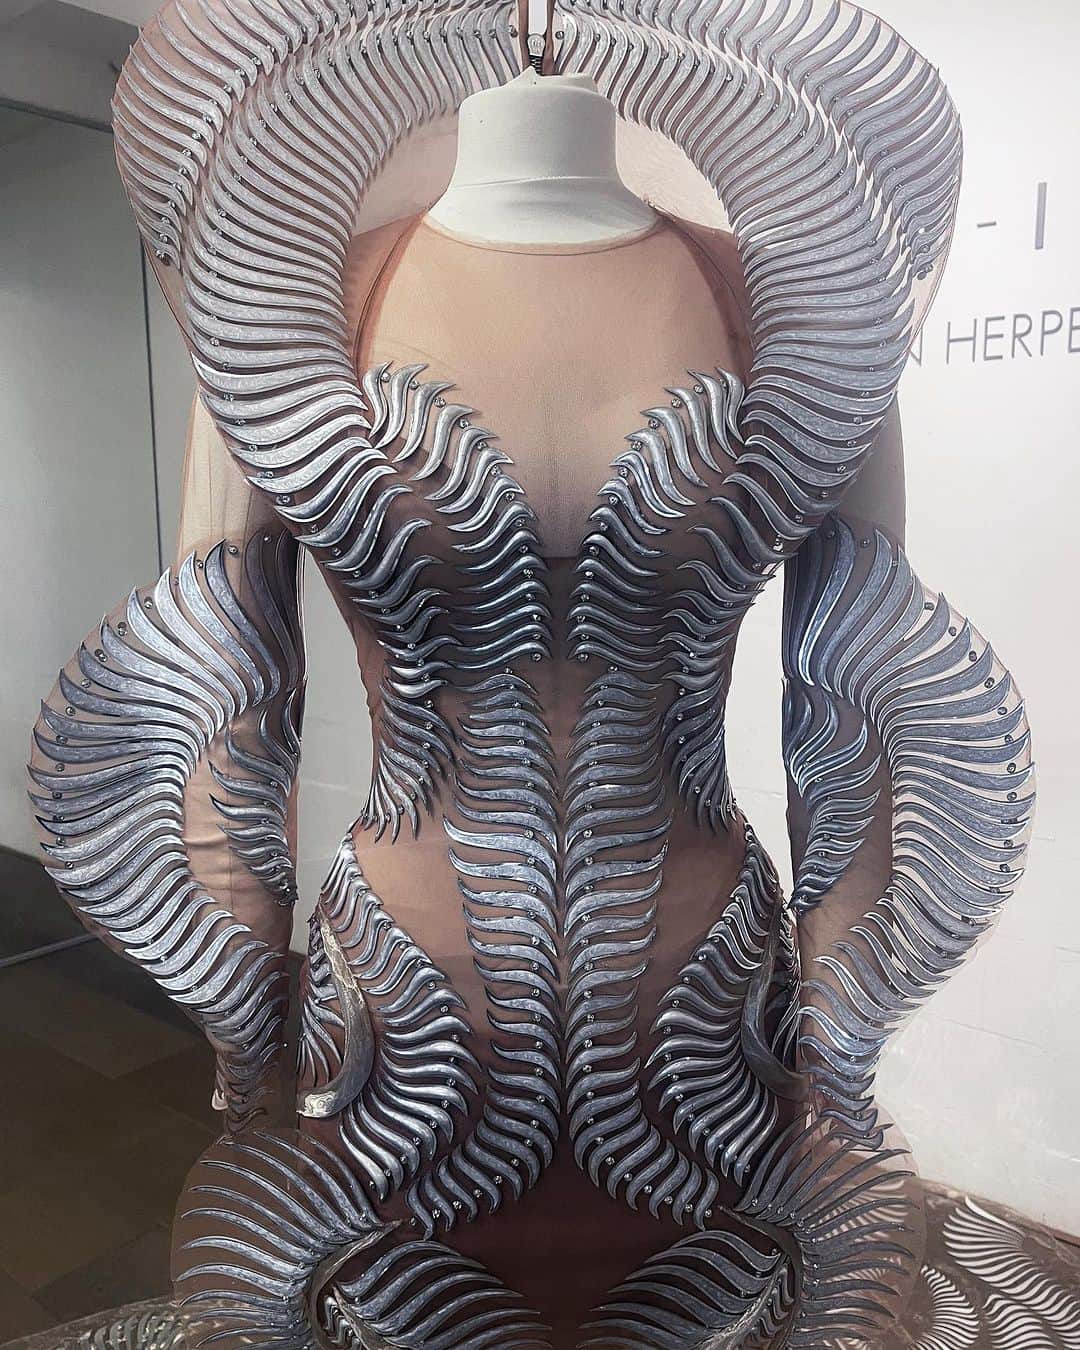 Iris Van Herpeのインスタグラム：「@Beyonce details ~  Almost a thousand falcate shapes were 3D constructed by casting silver-marbled silicone. The falcate molds were vacuum-formed first. Each falcate-shape is individually stitched onto a nude illusion tulle. Twelve people from the IVH atelier passionately created the Heliosphere gown for Beyonce that took a total of 700 hours from start to finish.  #irisvanherpen #hautecouture #beyonce #renaissanceworldtour」